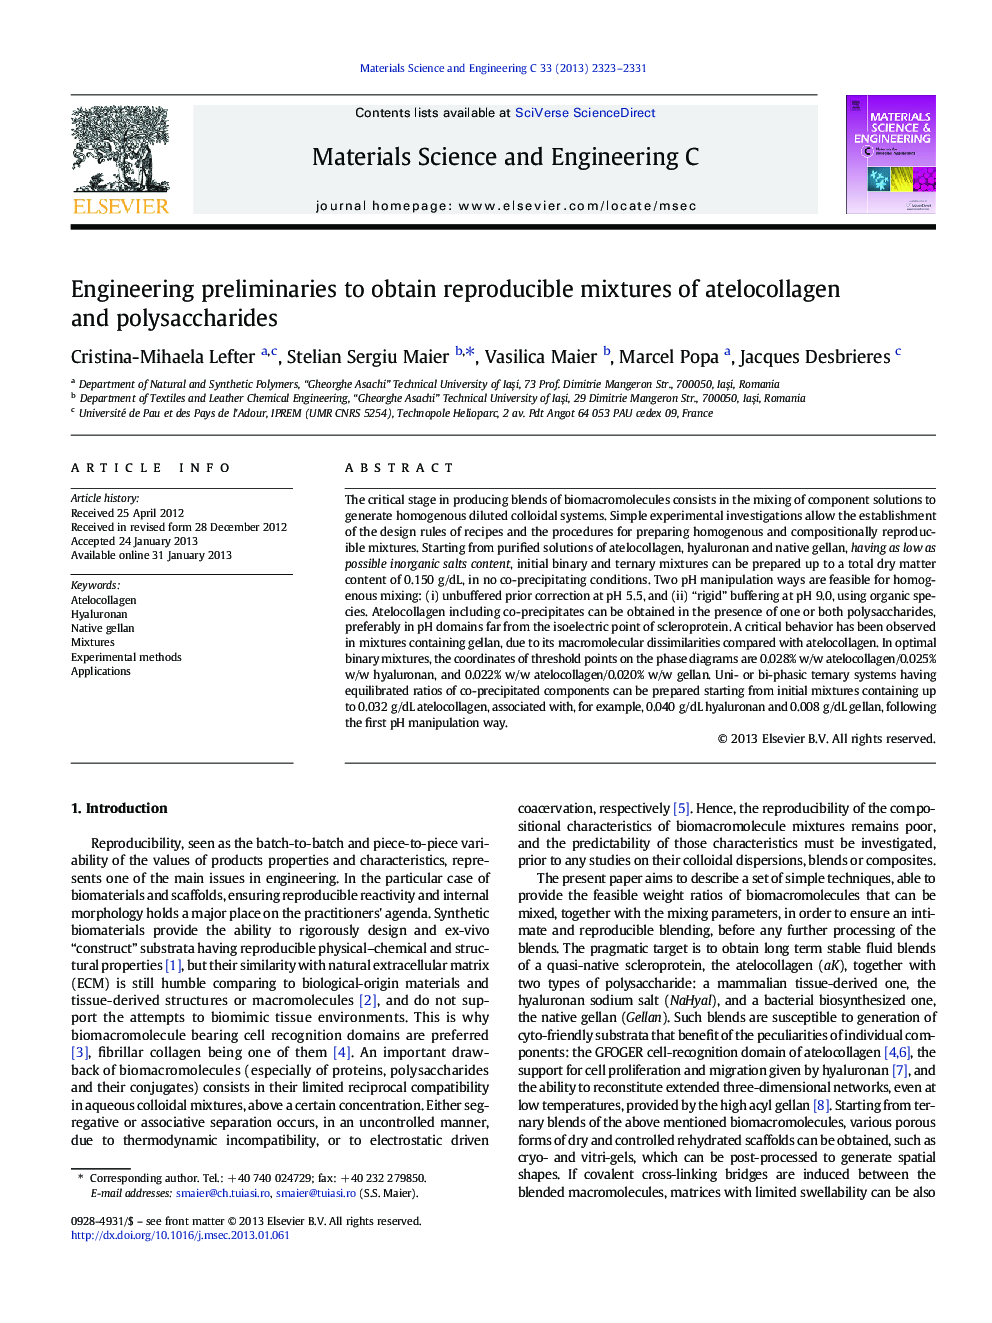 Engineering preliminaries to obtain reproducible mixtures of atelocollagen and polysaccharides